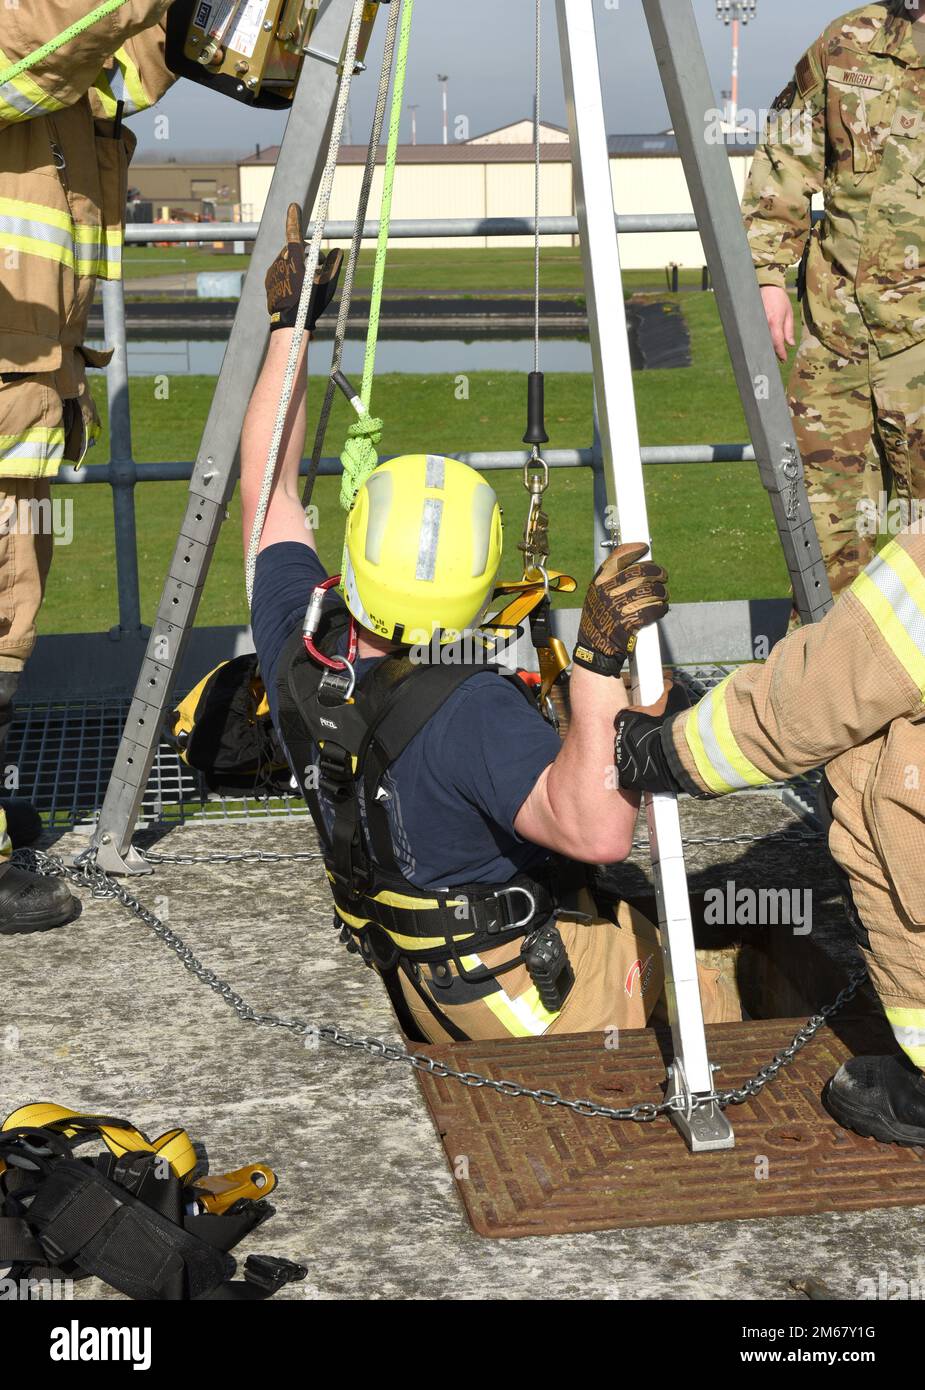 Firefighter Eddie Brant, 100th Civil Engineer Squadron Fire Department, rappels down into a confined space as other firefighters ensure he is securely attached and safe, during a training exercise at Royal Air Force Mildenhall, England, April 14, 2022. The scenario involved a teenager (simulated by a mannequin) who fell and was injured after climbing down into a facility. While climbing down to rescue the victim, another firefighter simulated also falling after slipping on a broken step, so Brant had to complete the rescue. Stock Photo